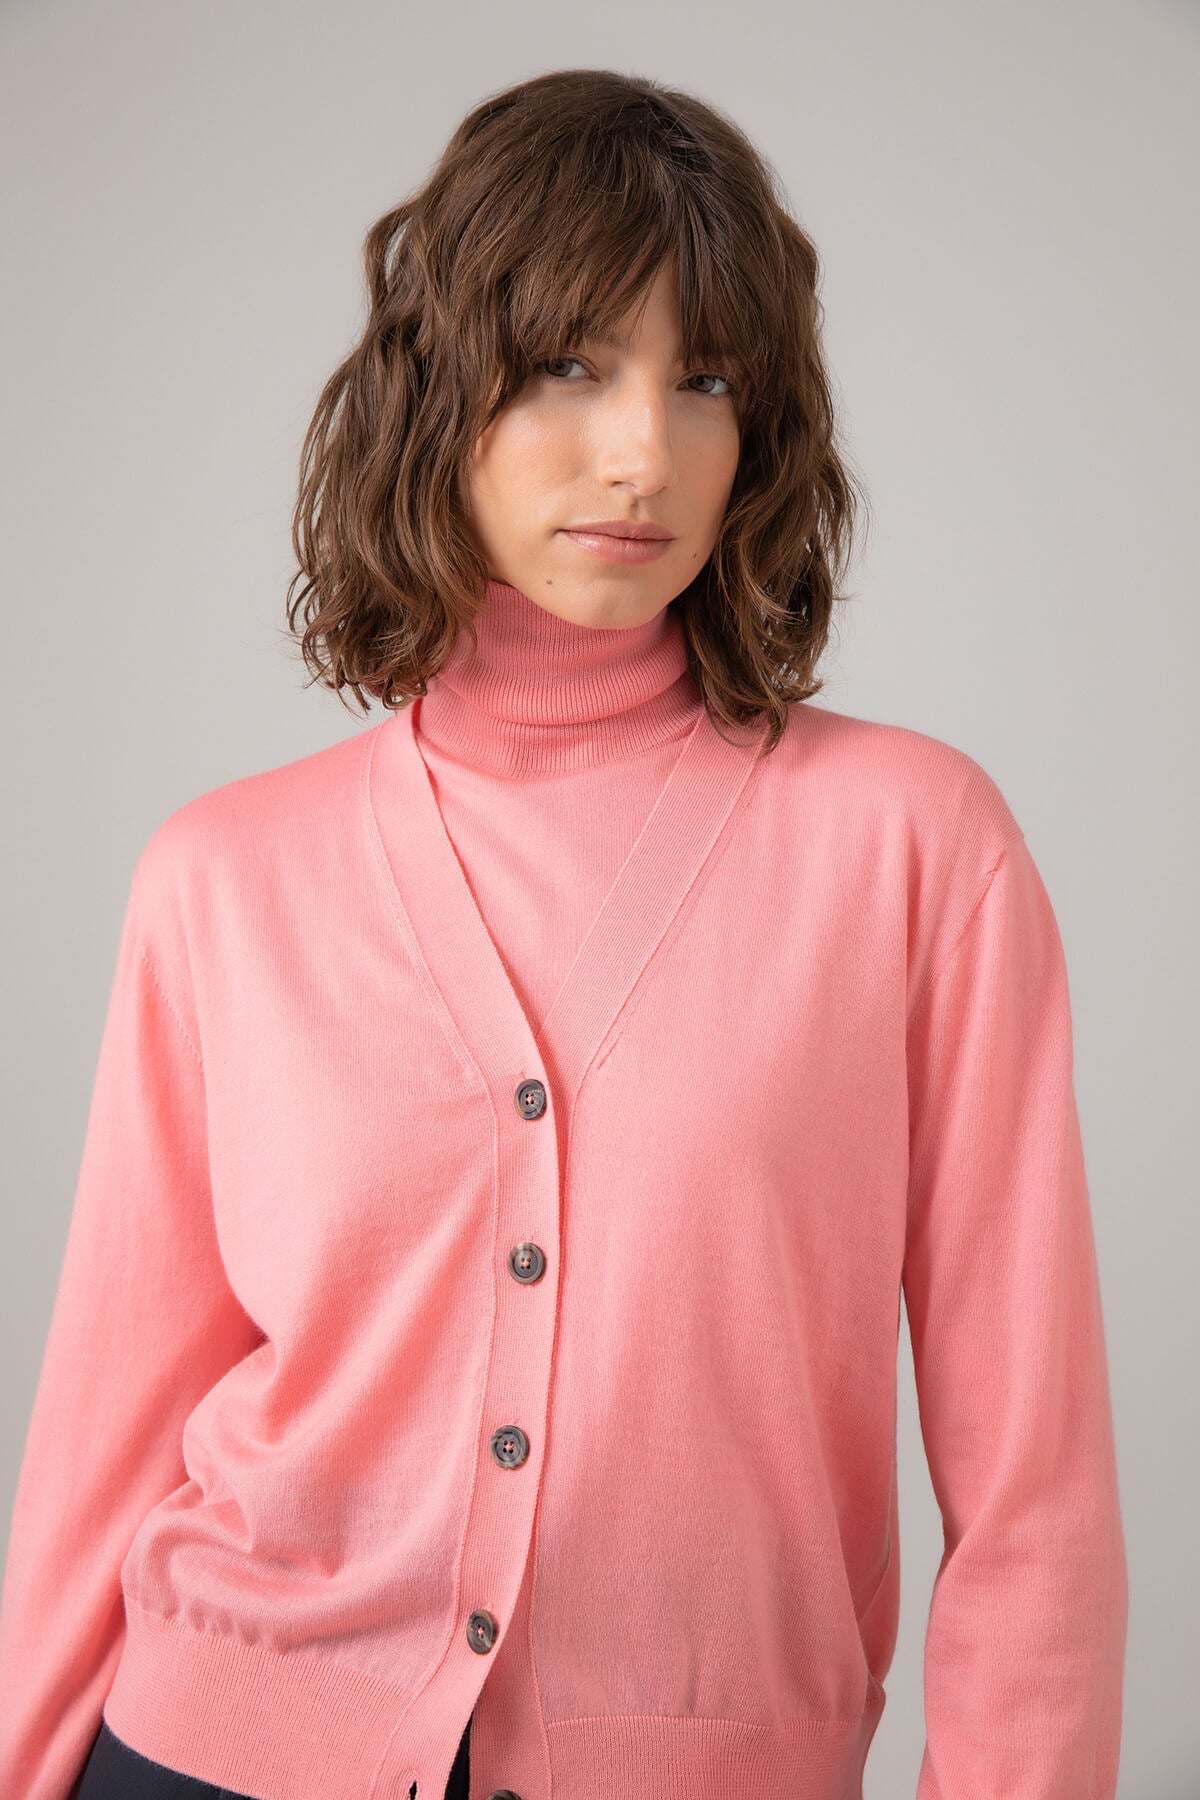 Johnstons of Elgin Women's Superfine Merino Cardigan in Orkney Pink worn with a matching Roll Neck on a grey background KDI00686SE4947